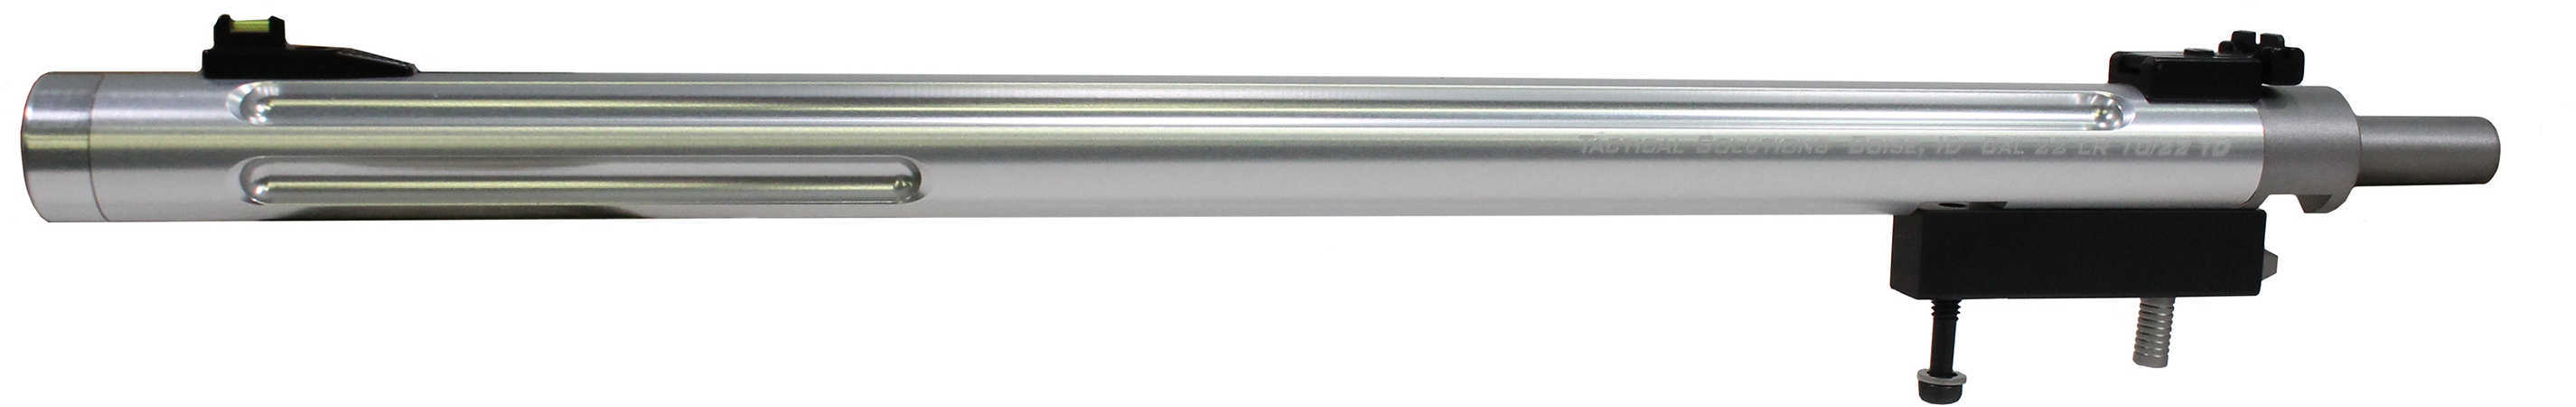 Tactical Solutions 10/22 Takedown Bull Barrel Silver Md: 1022TD-SIL-img-1